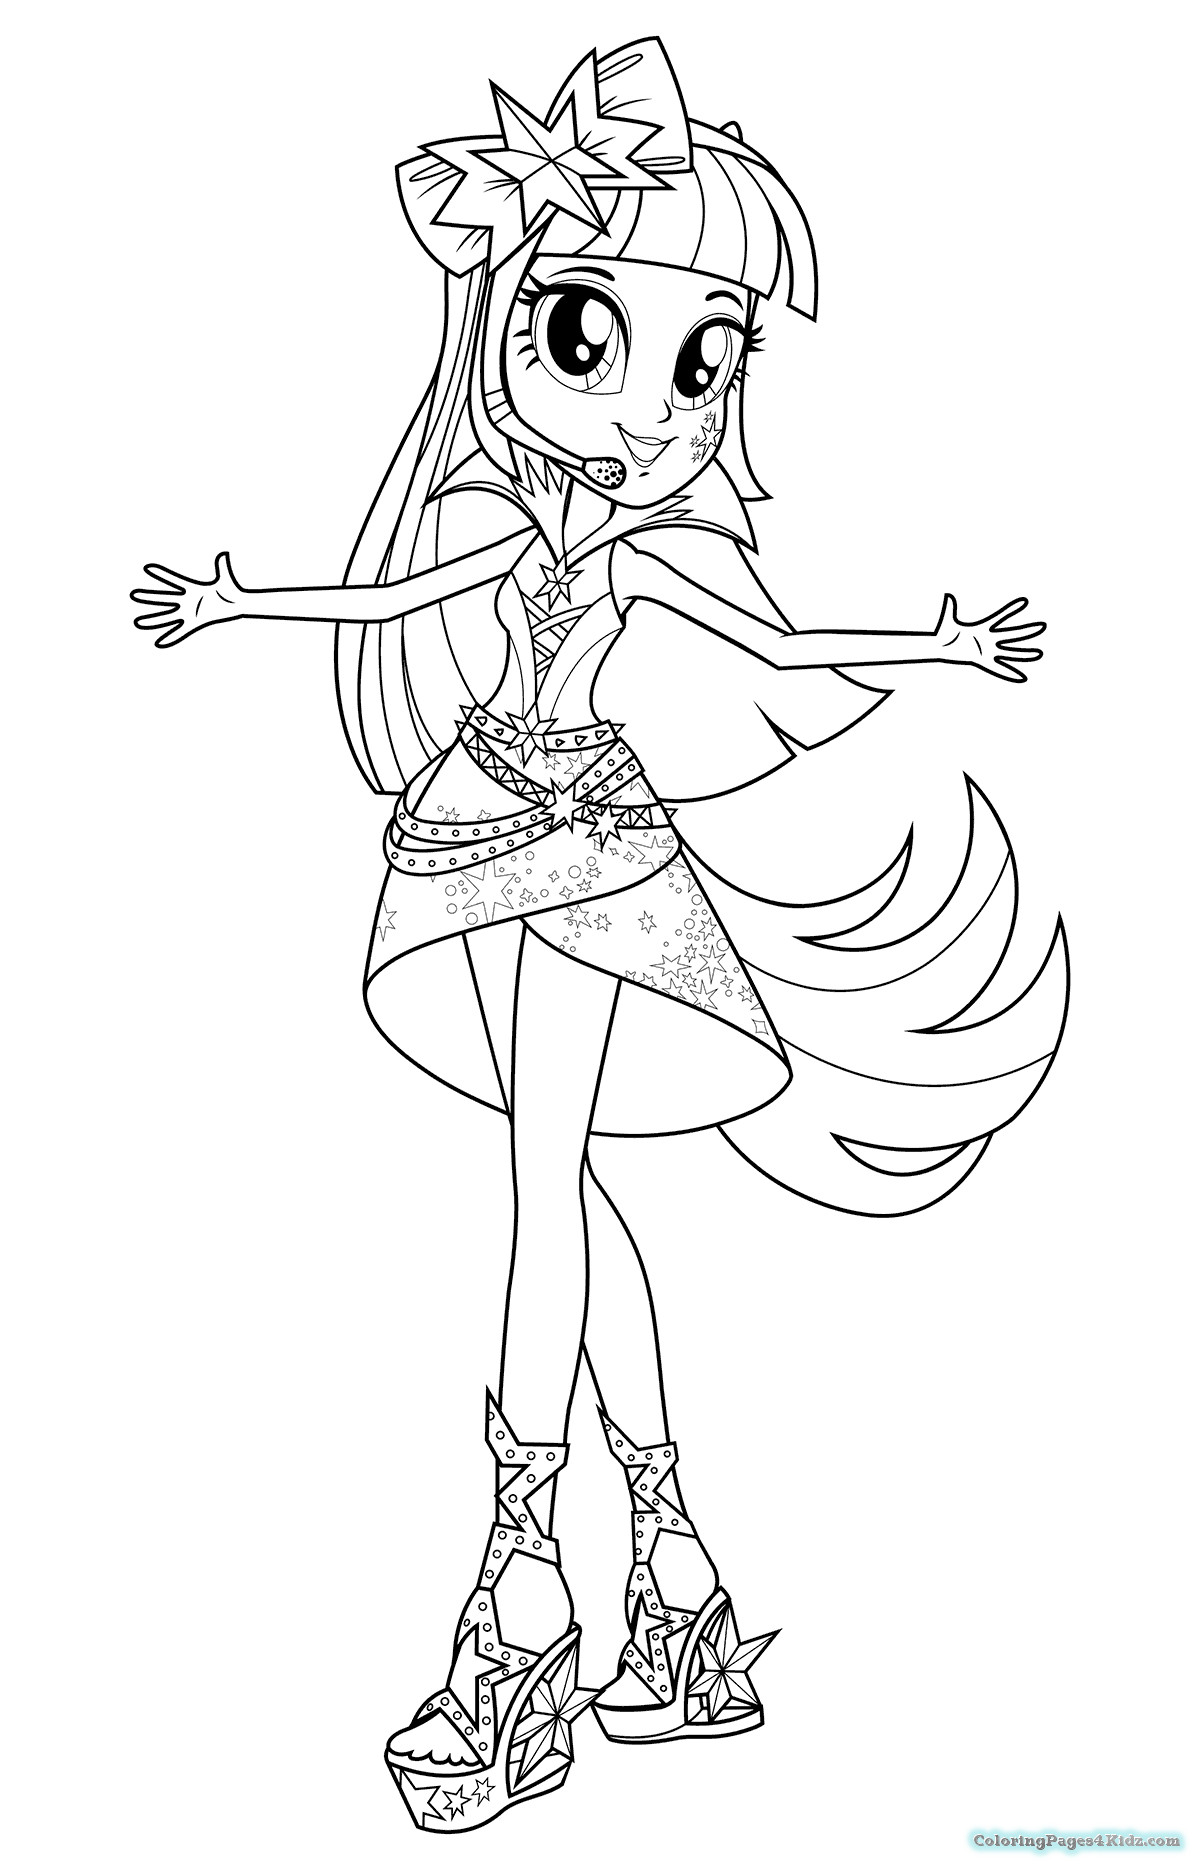 Equestria Girls Rainbow Rocks Coloring Pages
 My Little Pony Equestria Girls Rainbow Rocks Coloring